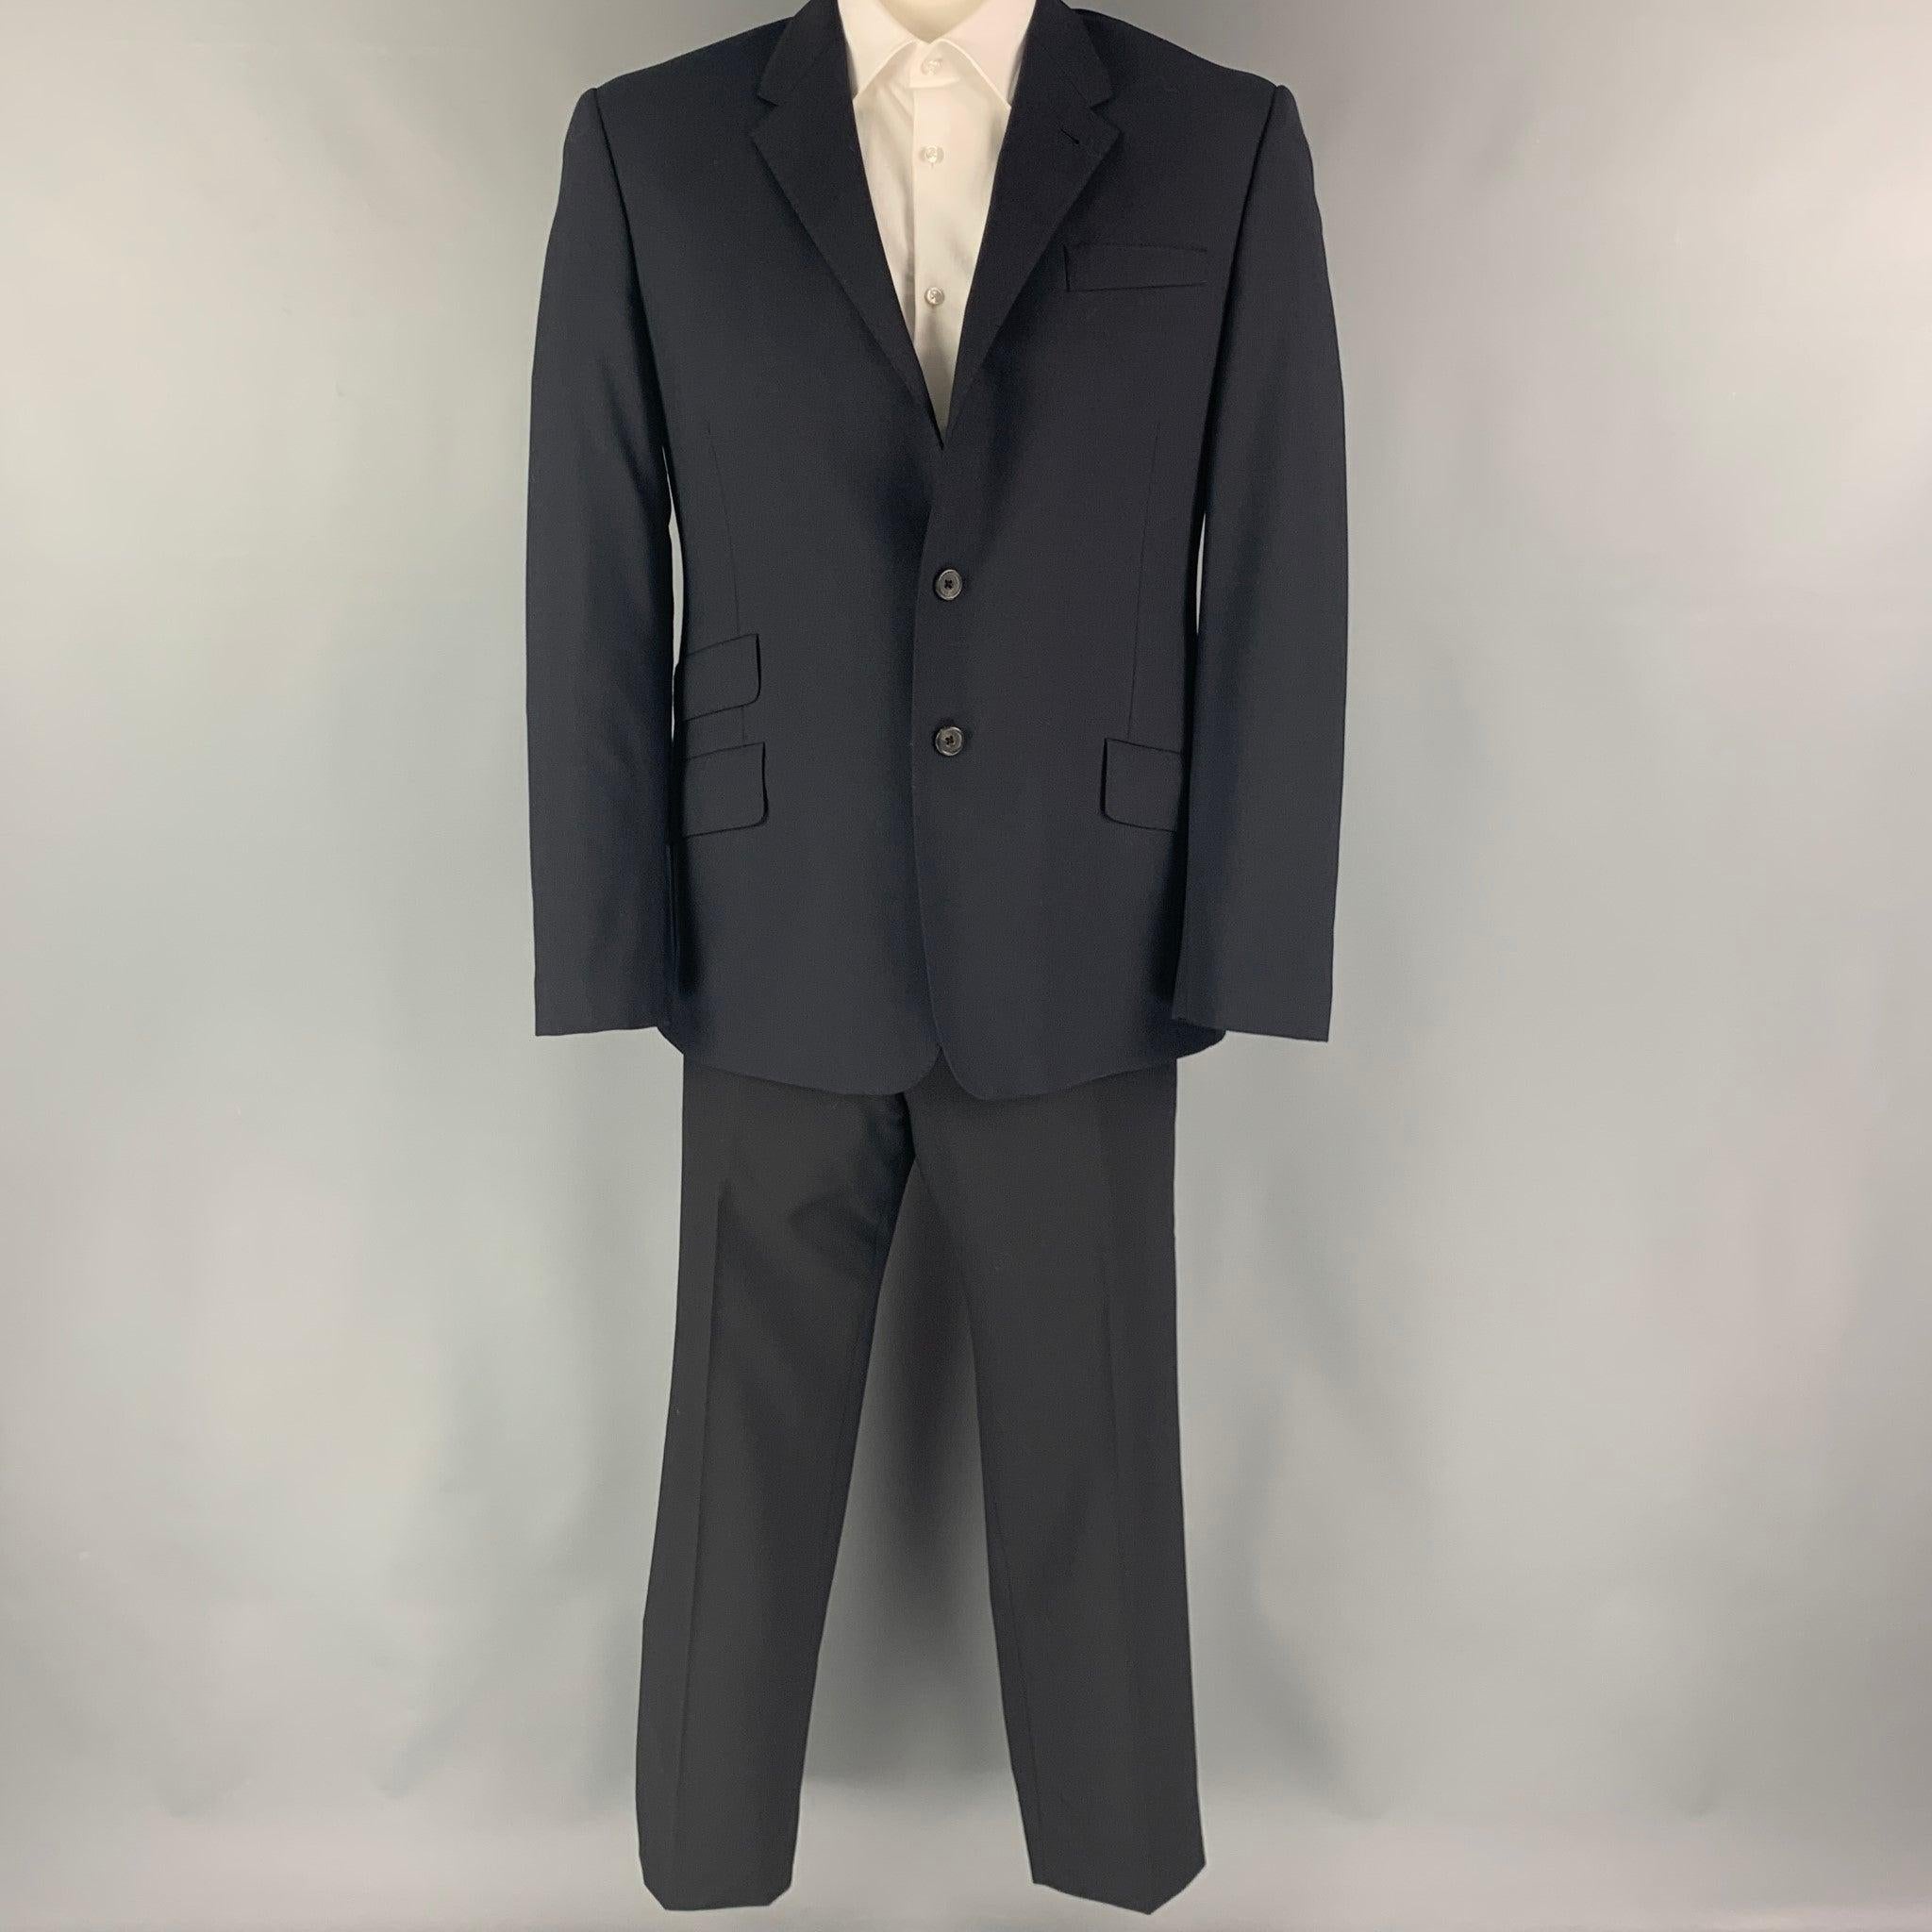 PAUL SMITH
suit comes in black wool with a full liner and includes a single breasted, double button sport coat with a notch lapel and matching flat front trousers. Excellent Pre-Owned Condition. 

Marked:   R 42  

Measurements: 
  -JacketShoulder: